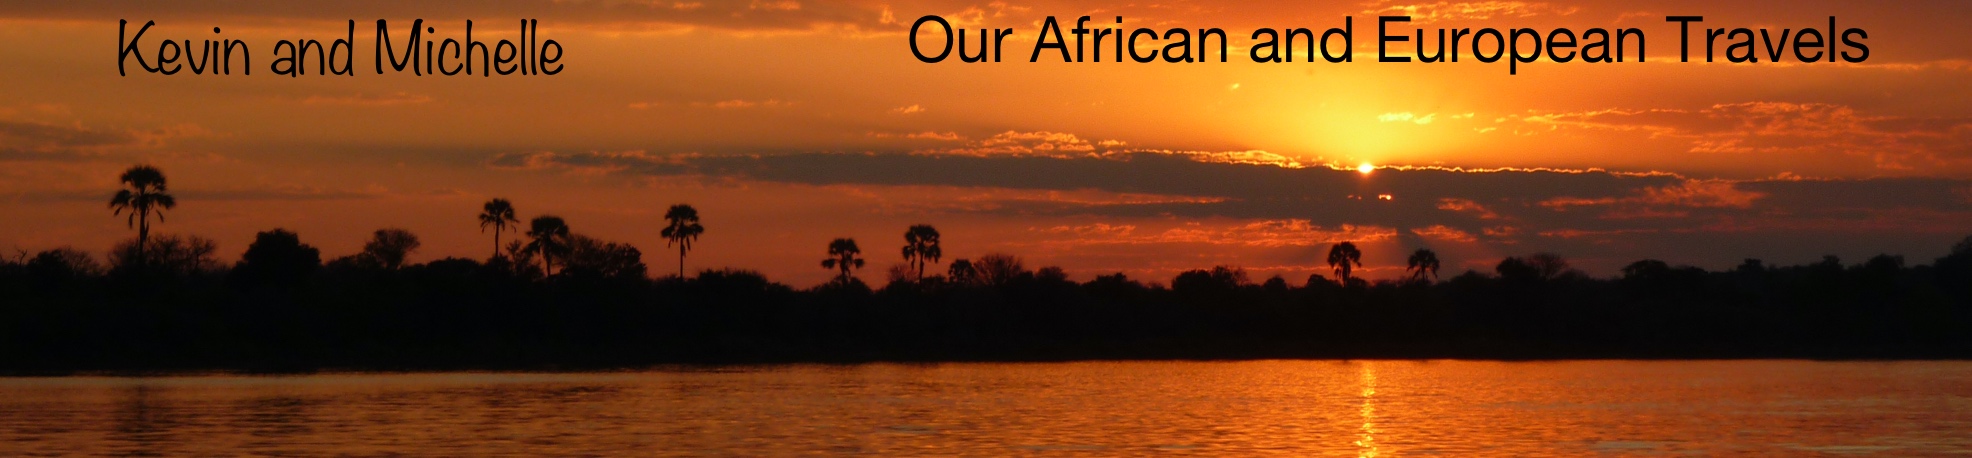 Title for Our African and European Travels